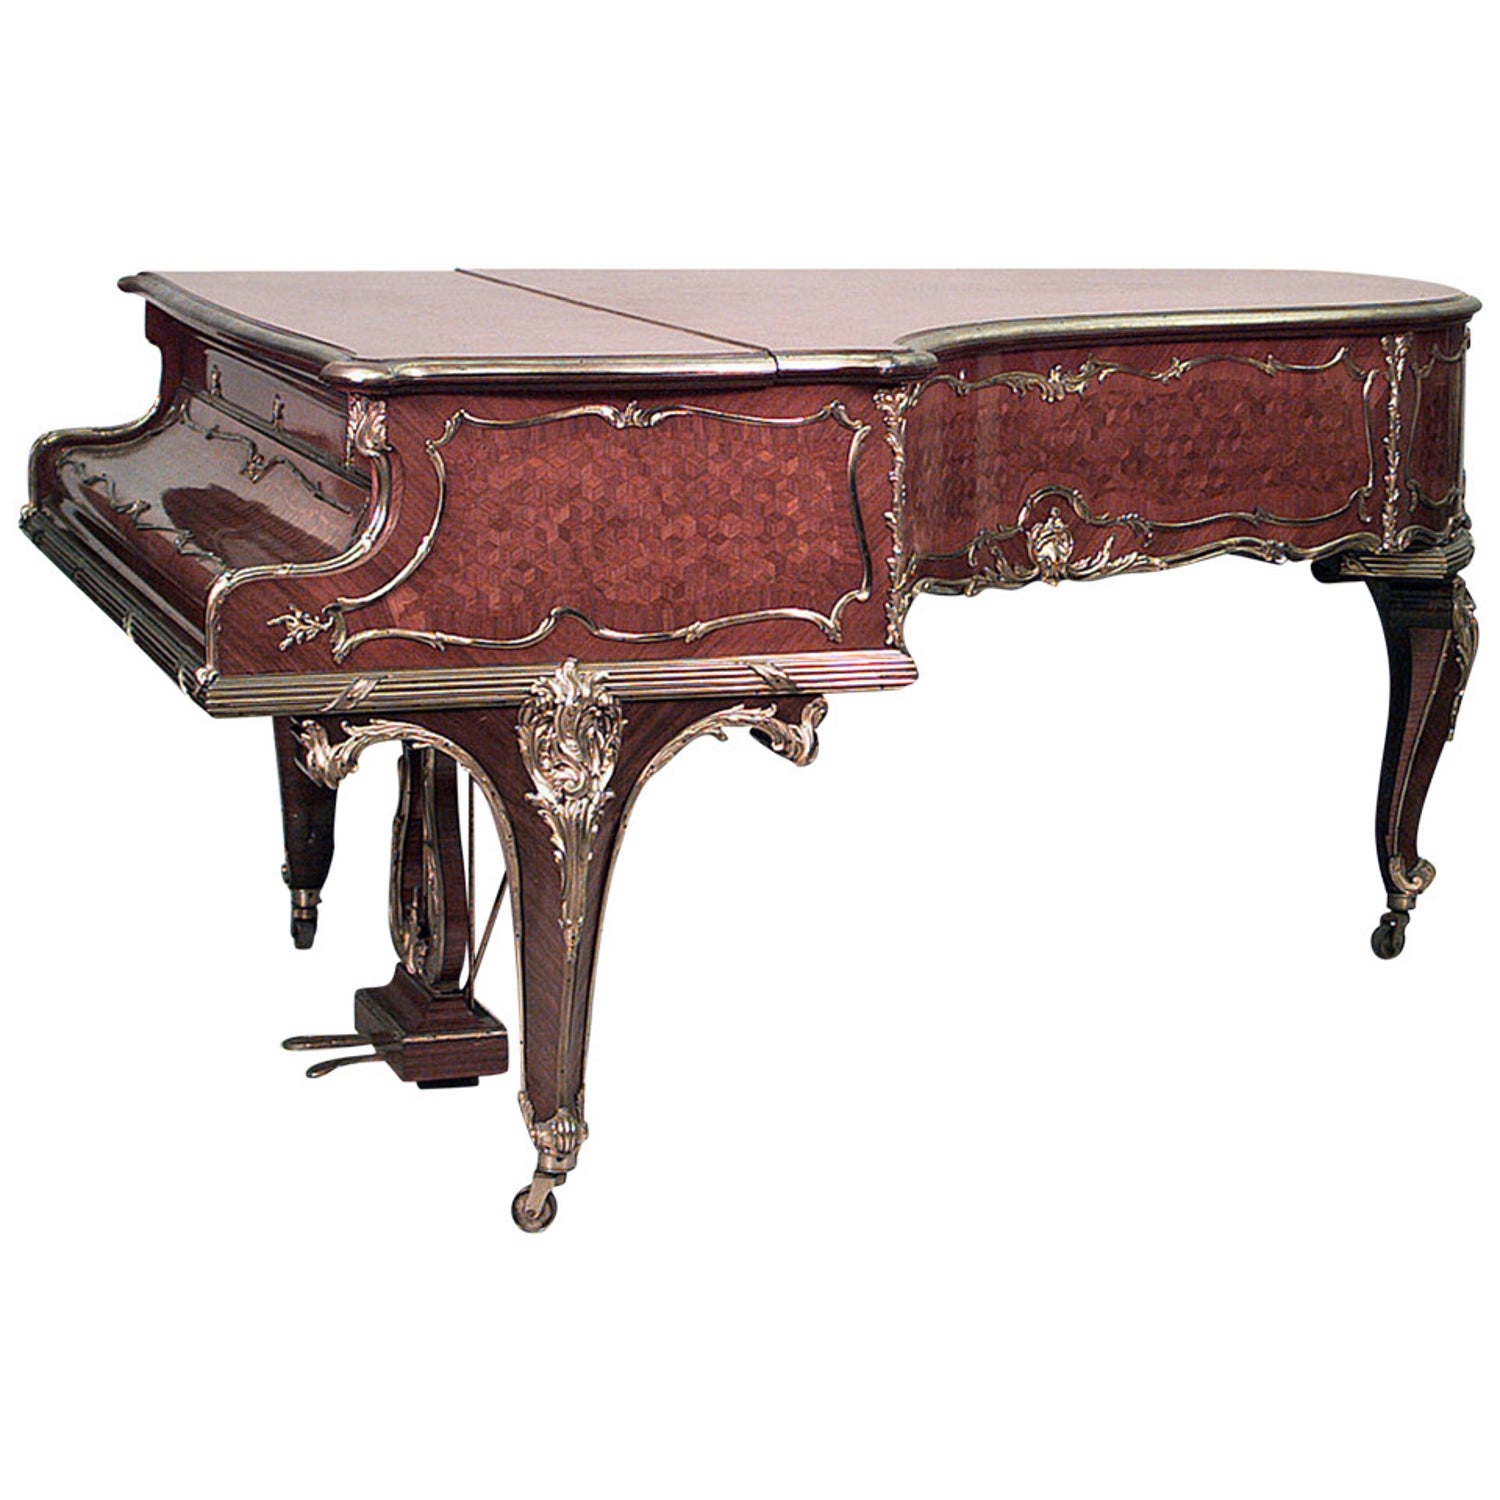 Louis XVI Style GBaby Grand Piano by Gaveau à Paris For Sale at 1stDibs